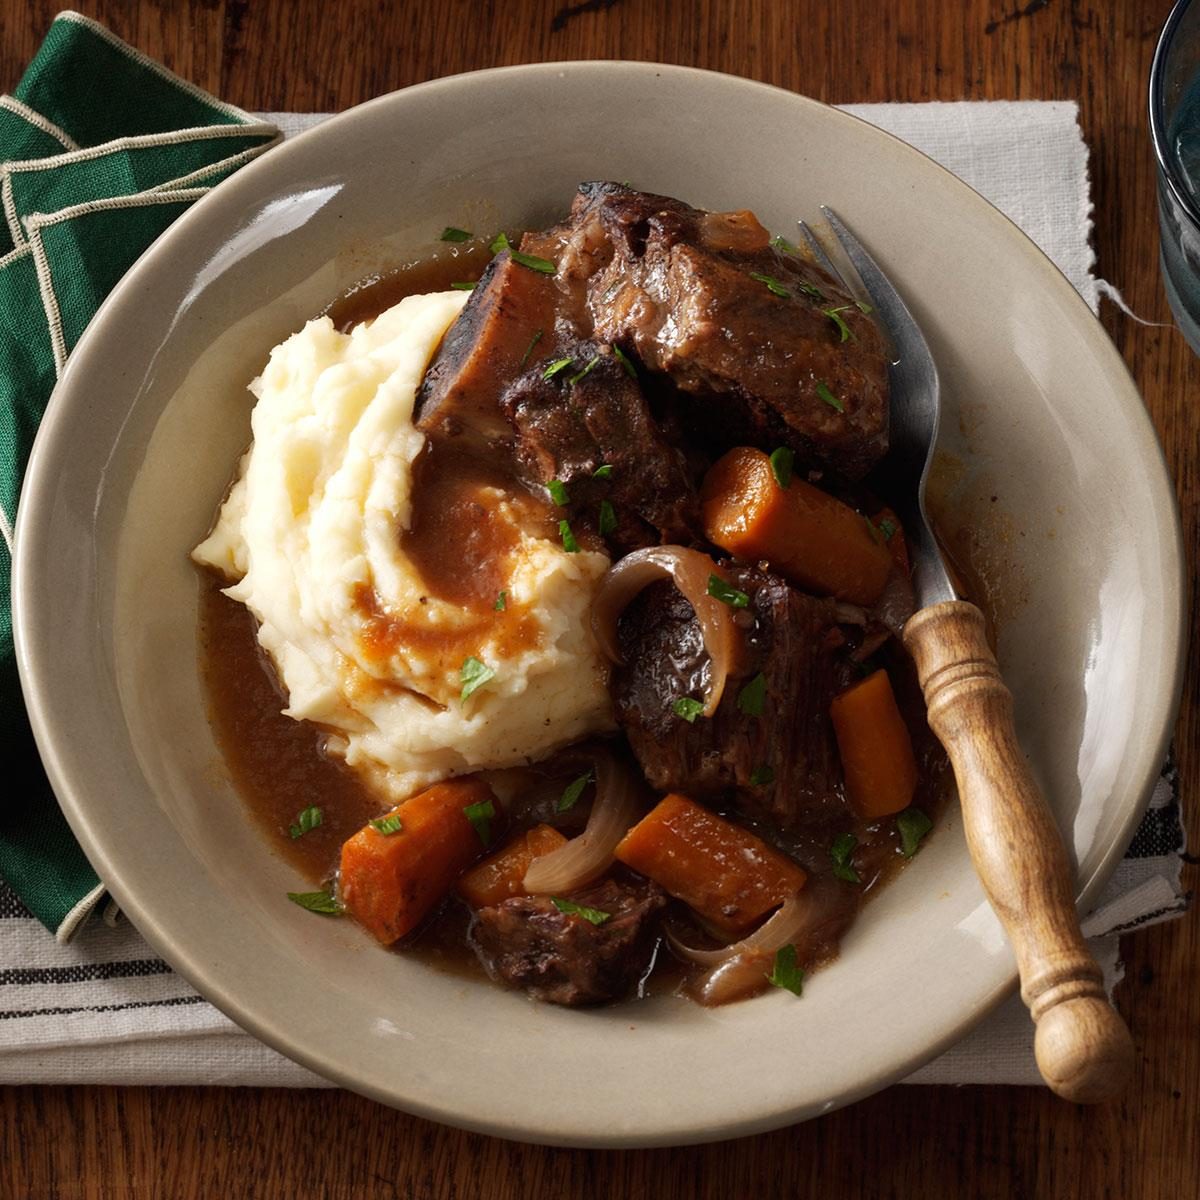 https://www.tasteofhome.com/wp-content/uploads/2018/01/Slow-Cooker-Short-Ribs_exps74925_TH143190C09_25_2bC_RMS-6.jpg